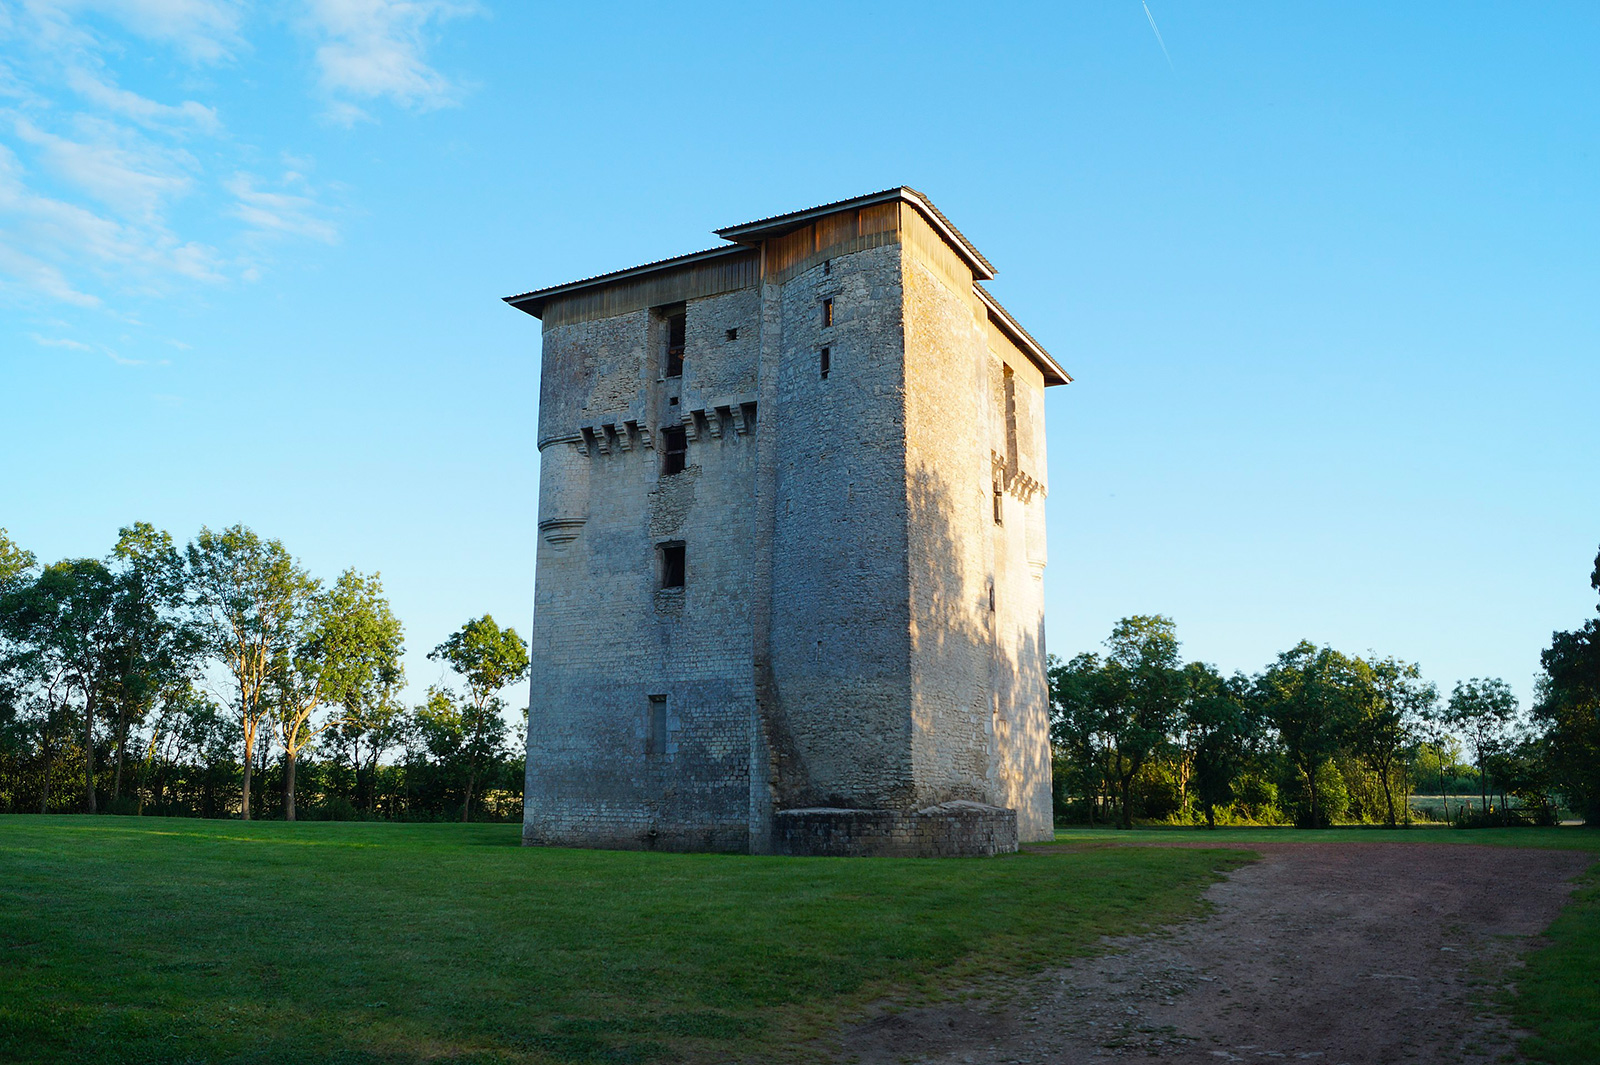 Moricq tower